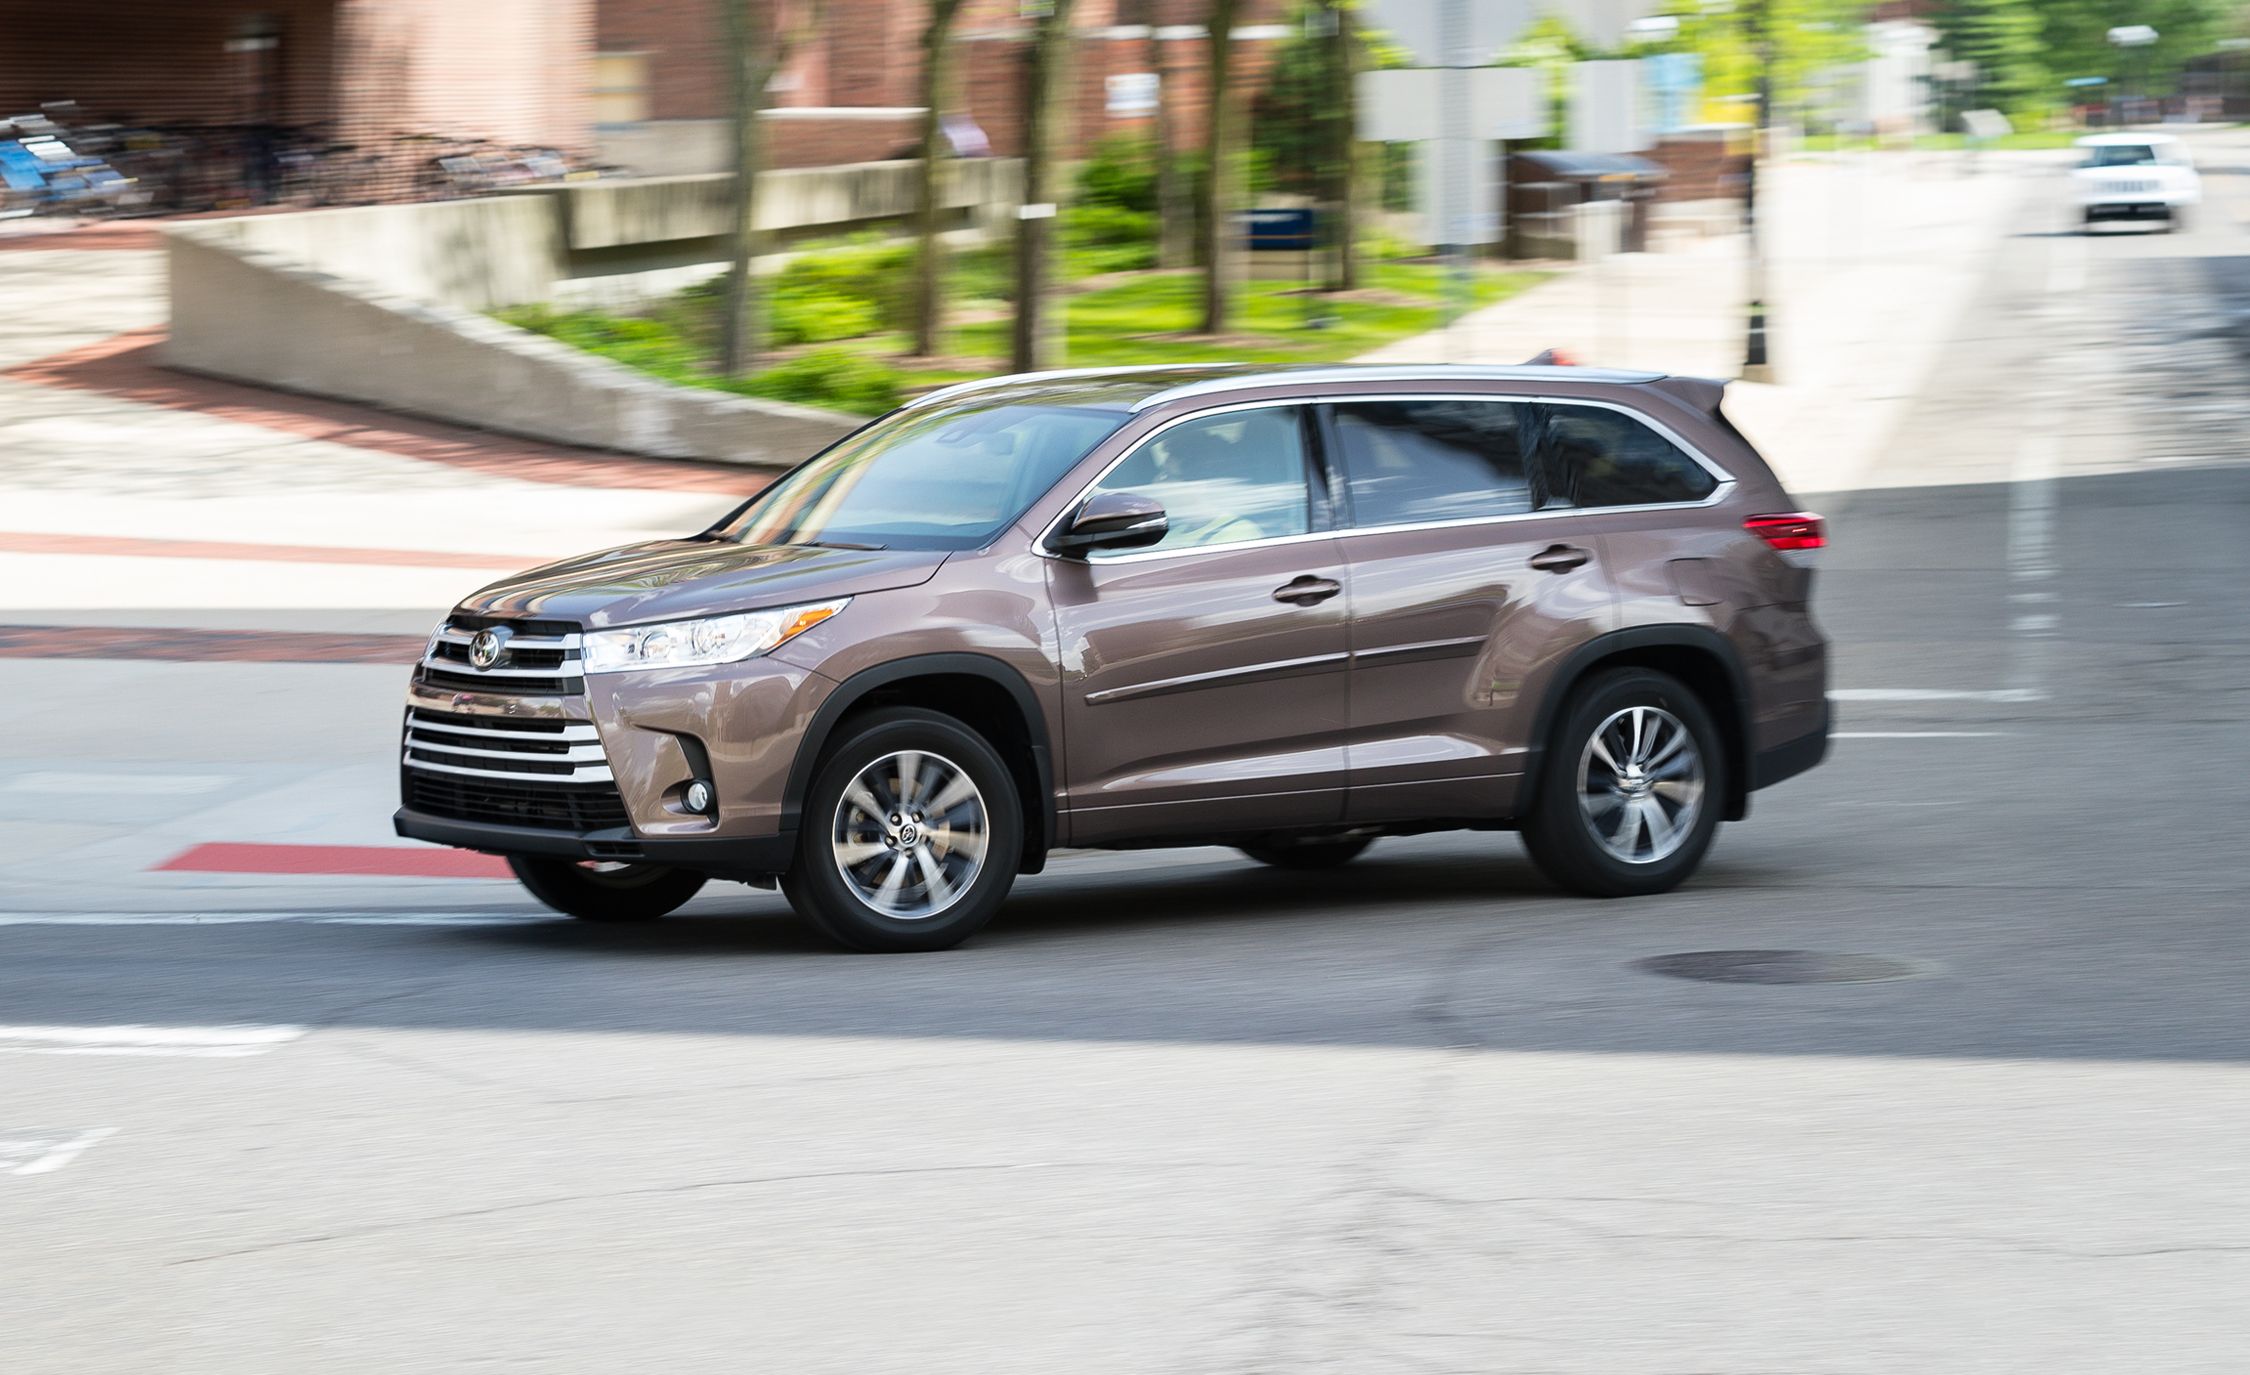 2018 Toyota Highlander Review, Pricing, and Specs